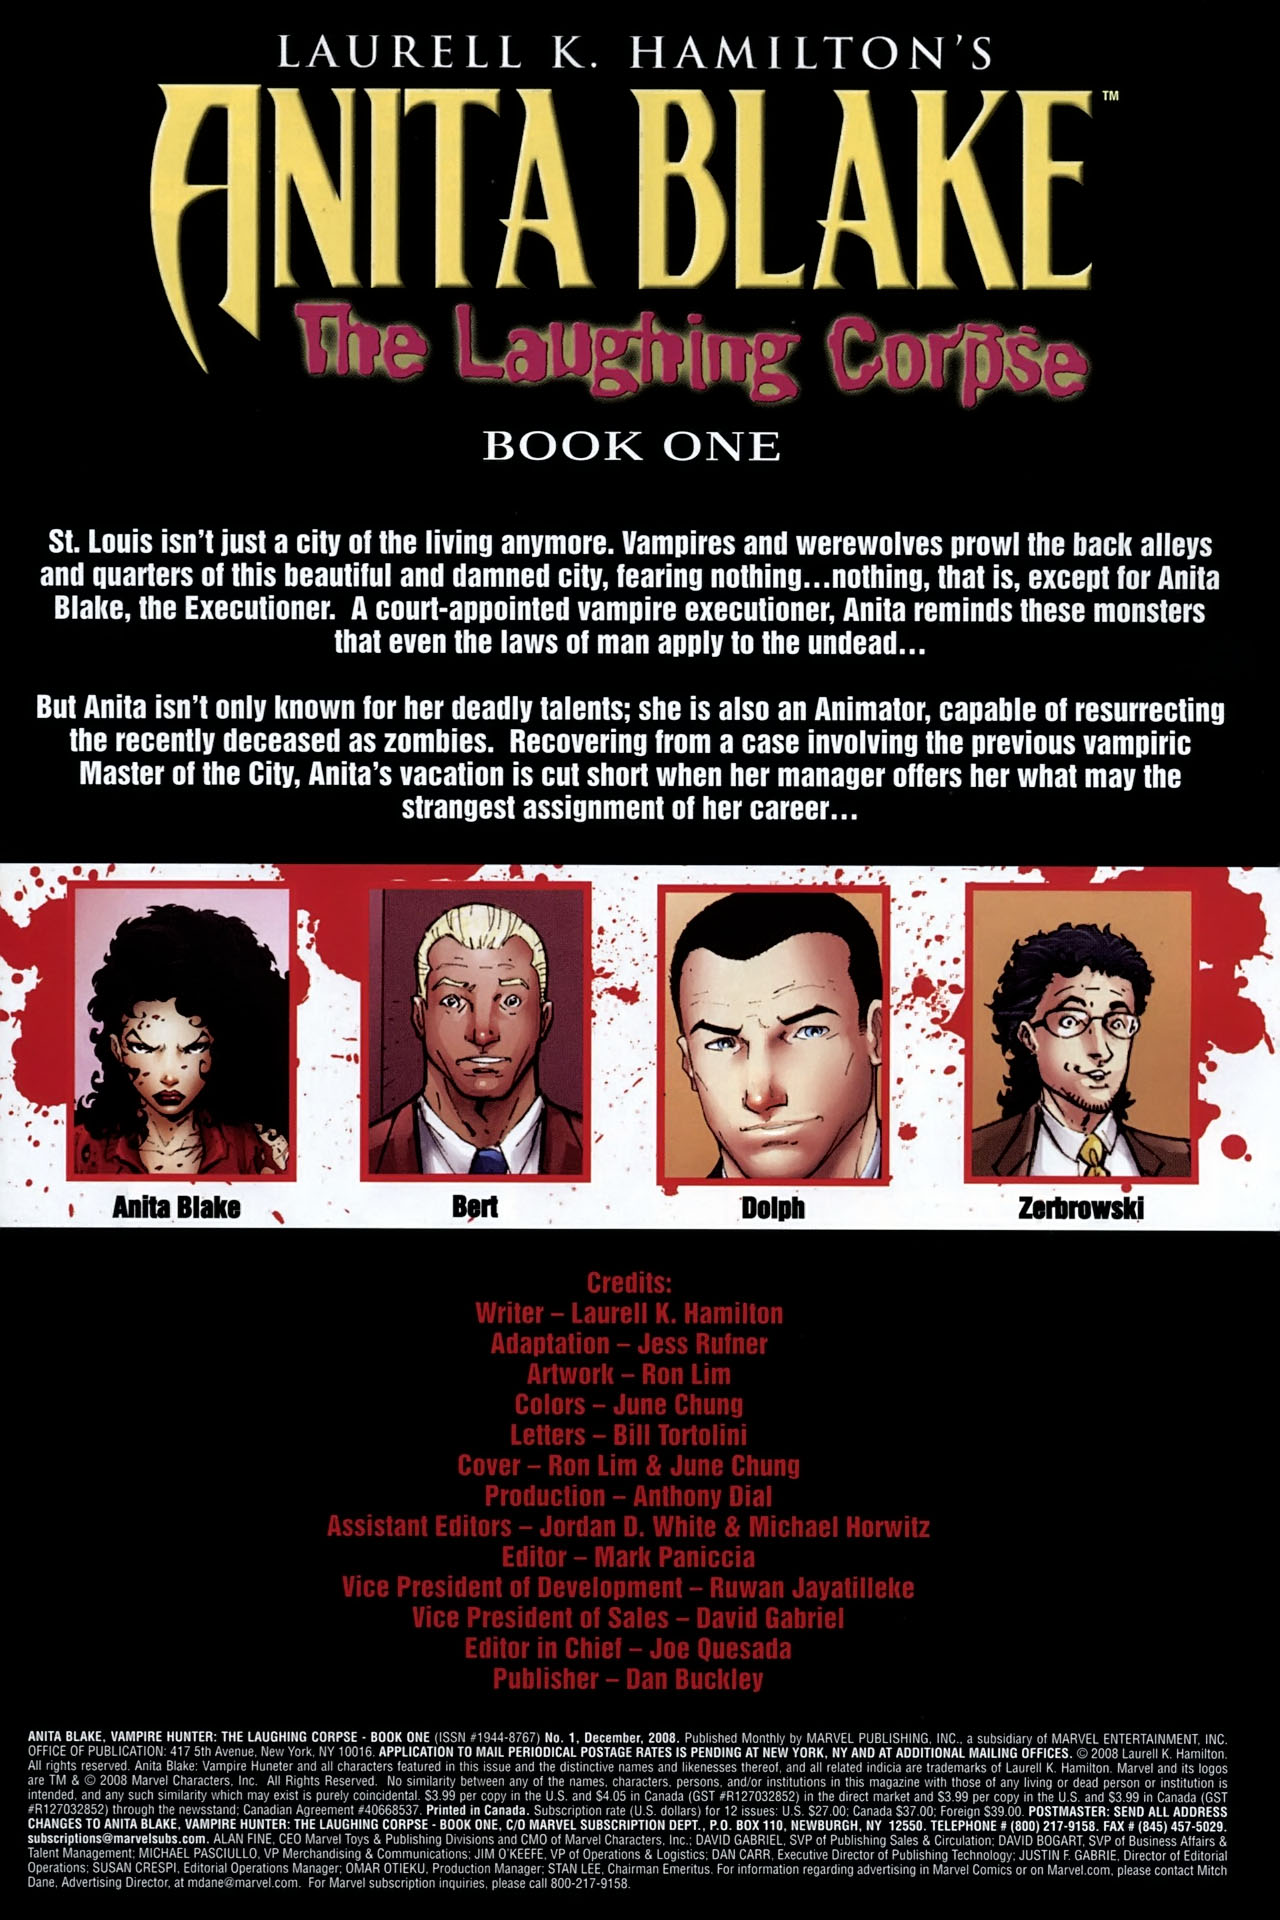 Read online Anita Blake: The Laughing Corpse - Book One comic -  Issue #1 - 2